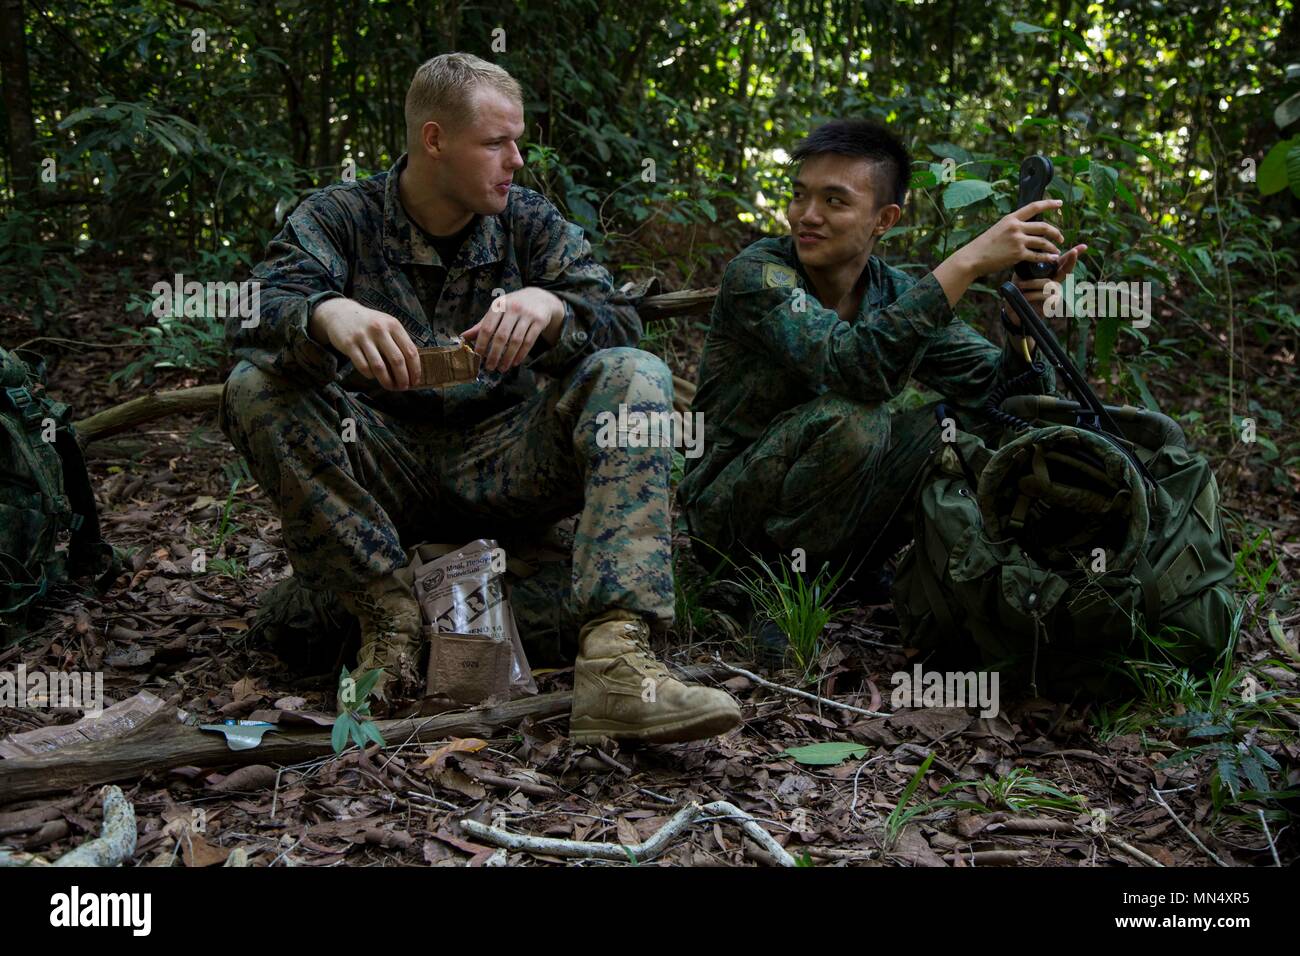 U.S. Marine Pfc. Stephen Crookston, a gunner with 1st Battalion, 3rd Marine Regiment speaks with Lance Cpl. Kevin Tan, a gunner with 3rd Battalion, Guards about the land navigation mission assigned to them during Exercise Valiant Mark on Tekong, Island, Singapore, Aug. 23, 2017. Exercise Valiant Mark builds, maintains and enhances bilateral defense and interoperability of military forces between the United States and Singapore. (U.S. Marine Corps photo by Lance Cpl. Osvaldo L. Ortega III) Stock Photo